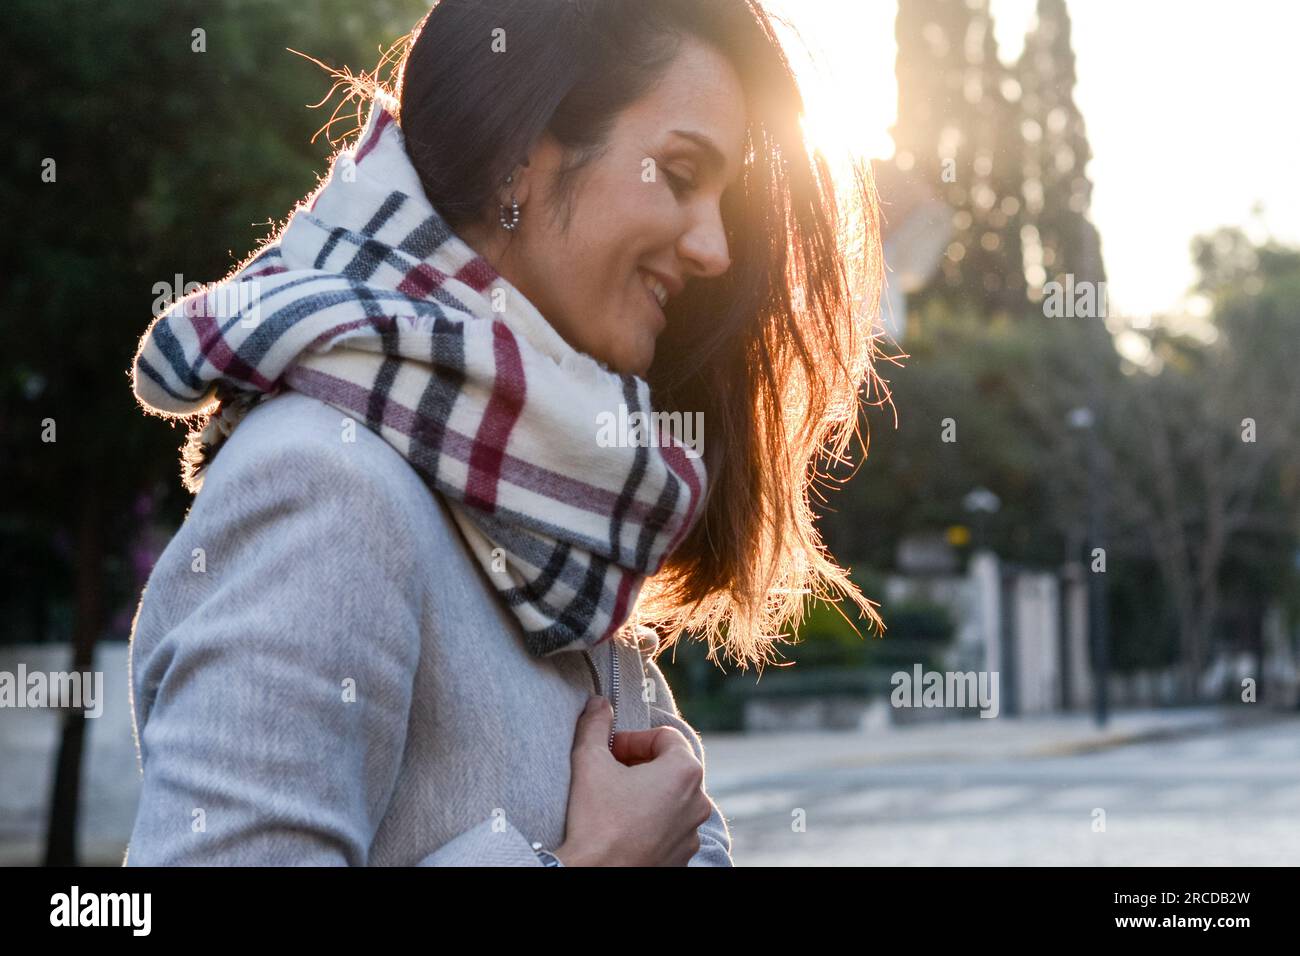 Profile of happy young woman face looking down Stock Photo